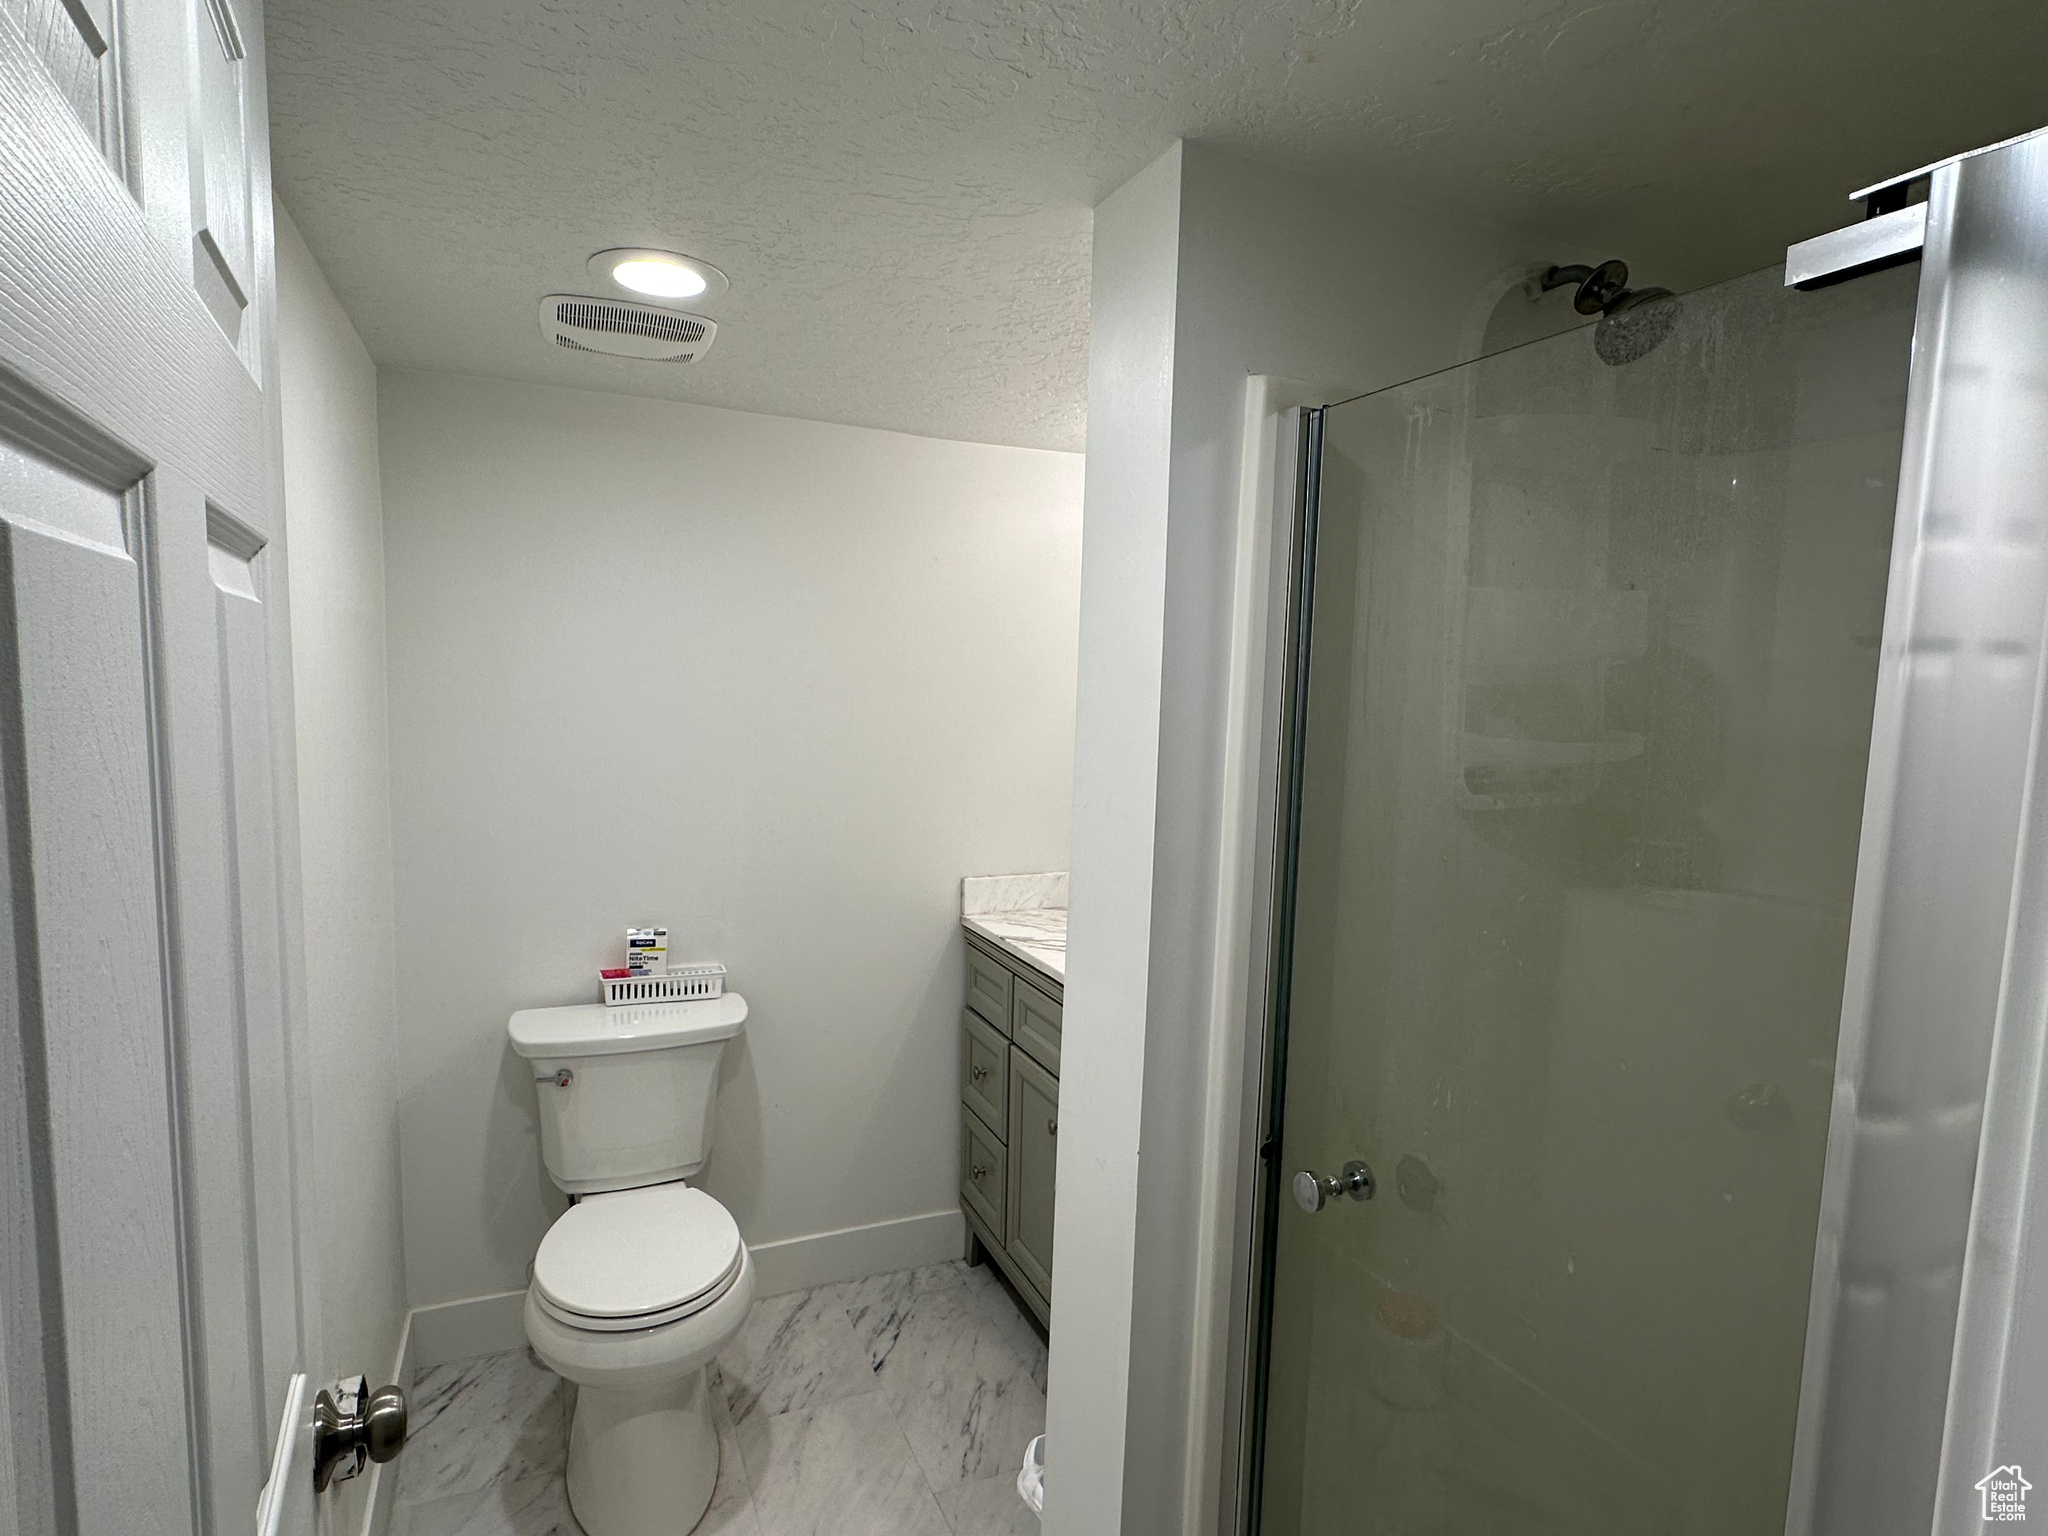 Bathroom featuring tile flooring, a textured ceiling, toilet, a shower with shower door, and vanity